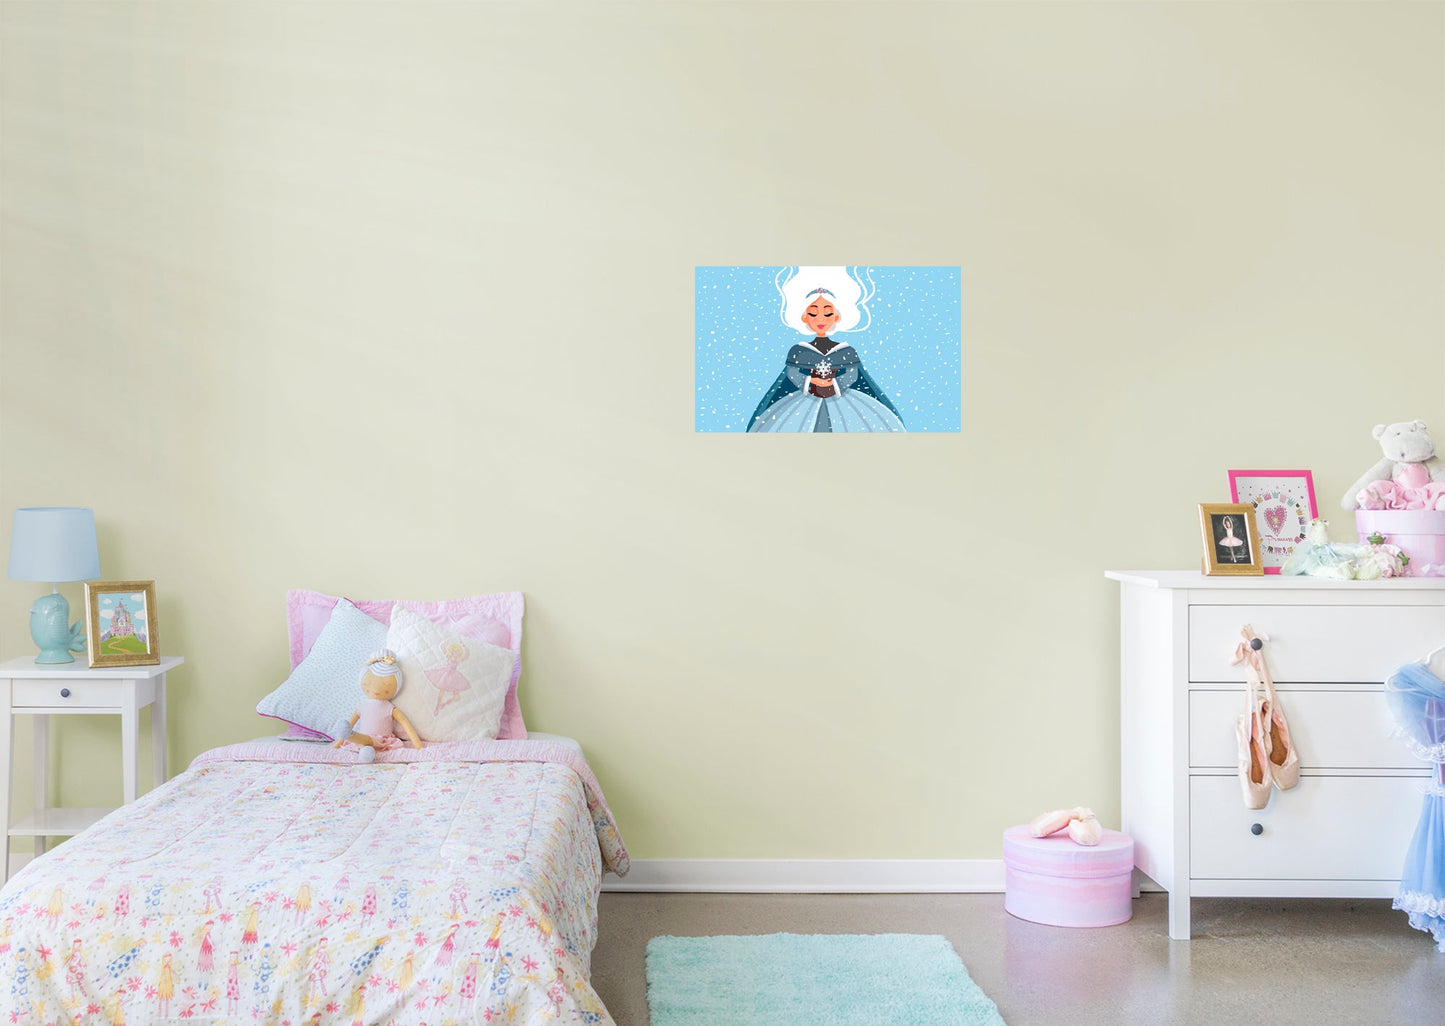 Nursery Princess:  It's Snowing Mural        -   Removable Wall   Adhesive Decal